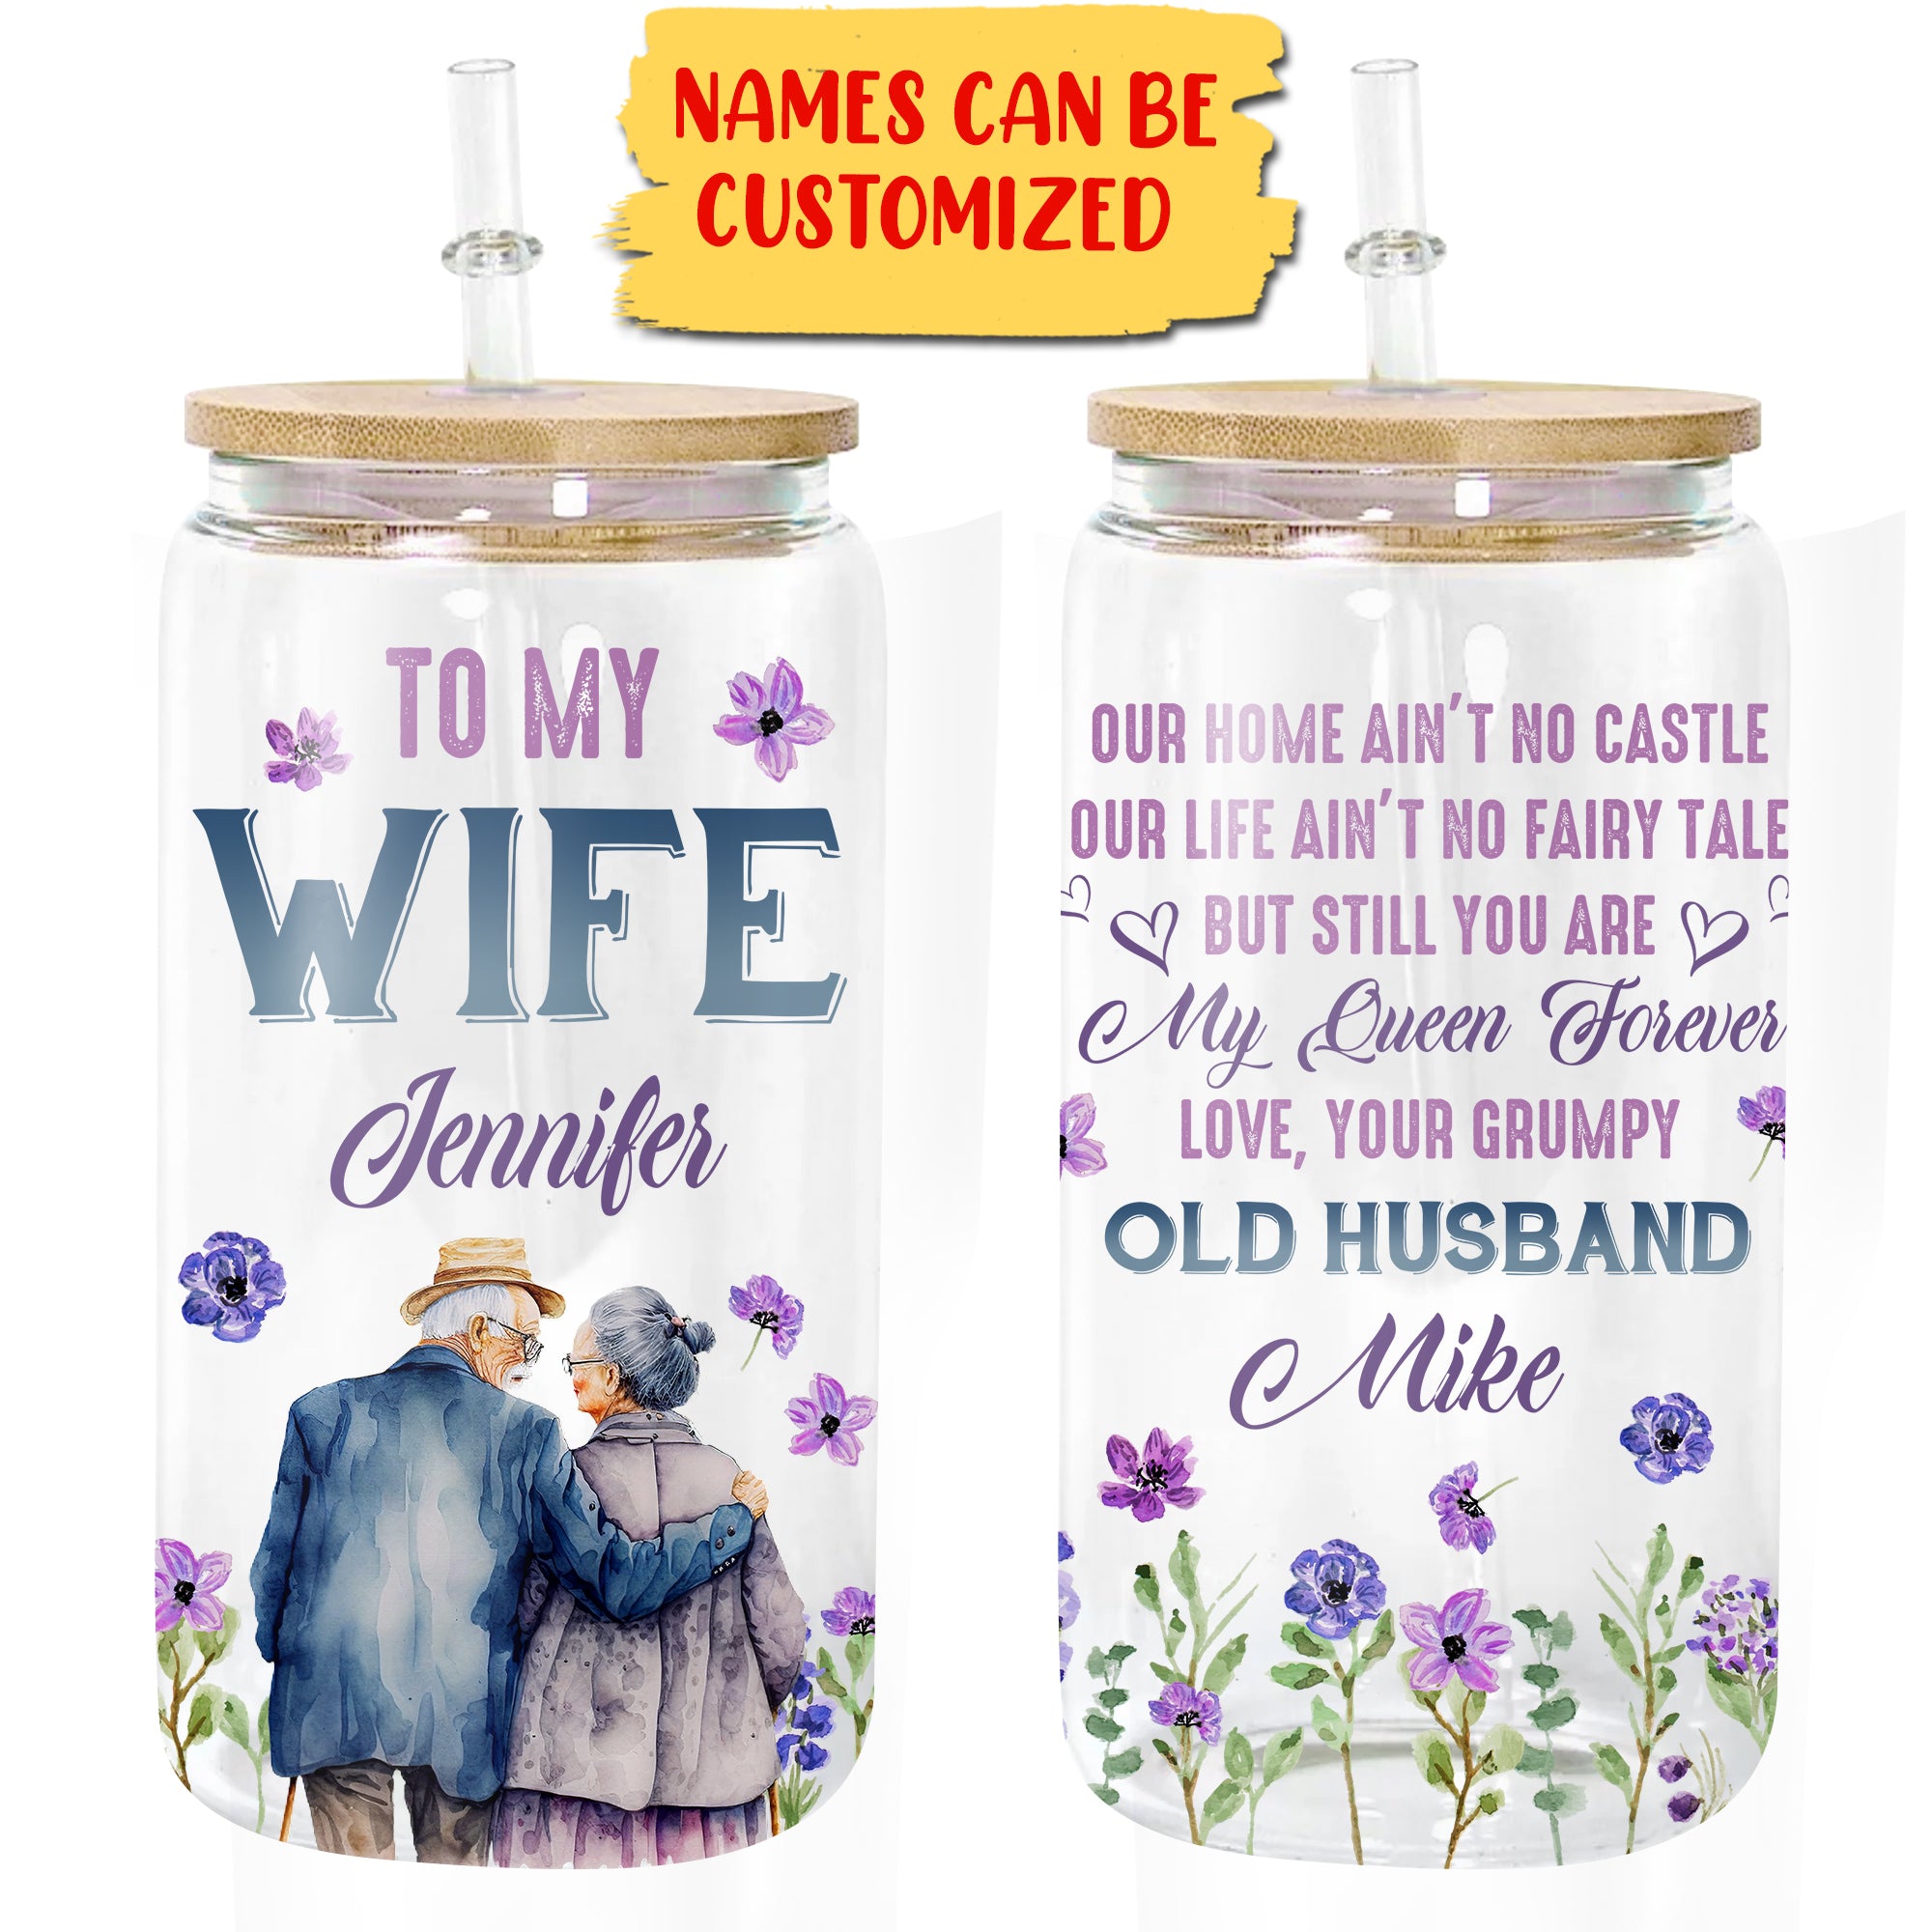 To My Wife My Queen Forever - Custom Name - Personalized Glass Bottle, Frosted Bottle